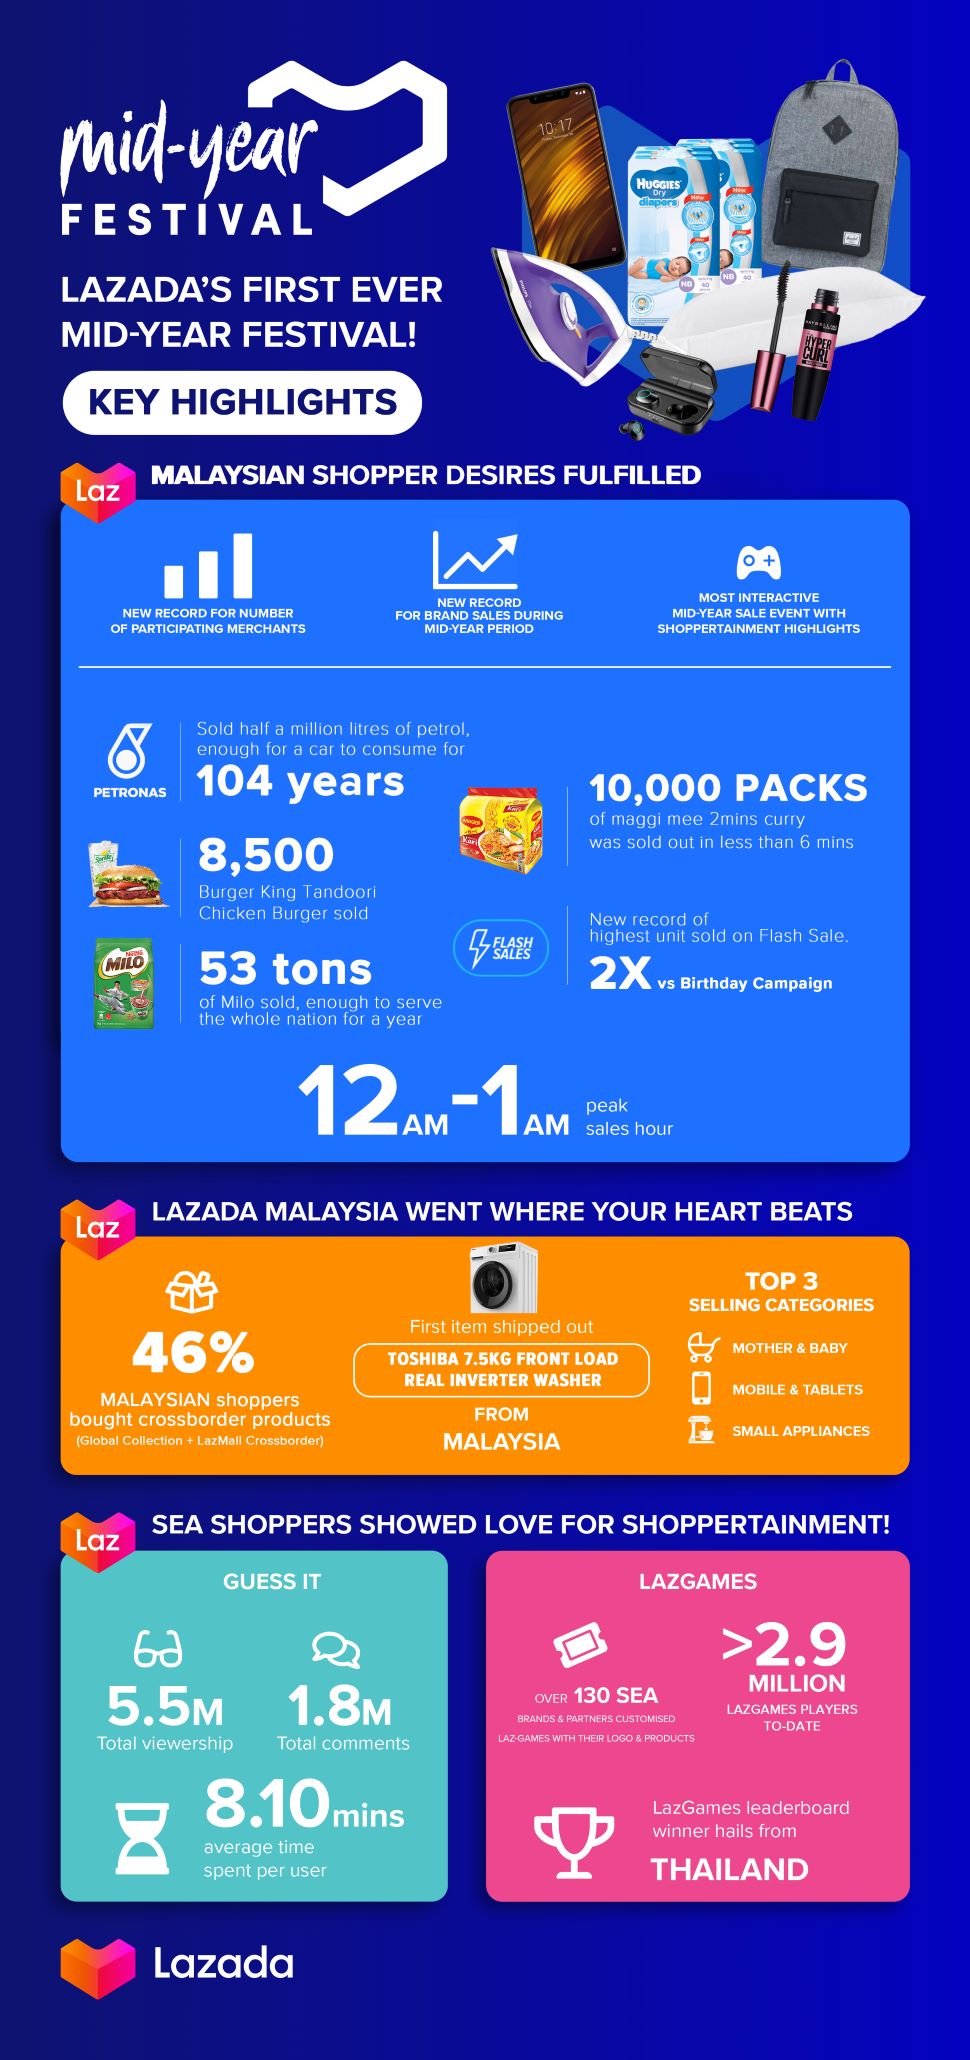 Lazada-Mid-Year Festival on 12 July-infographic